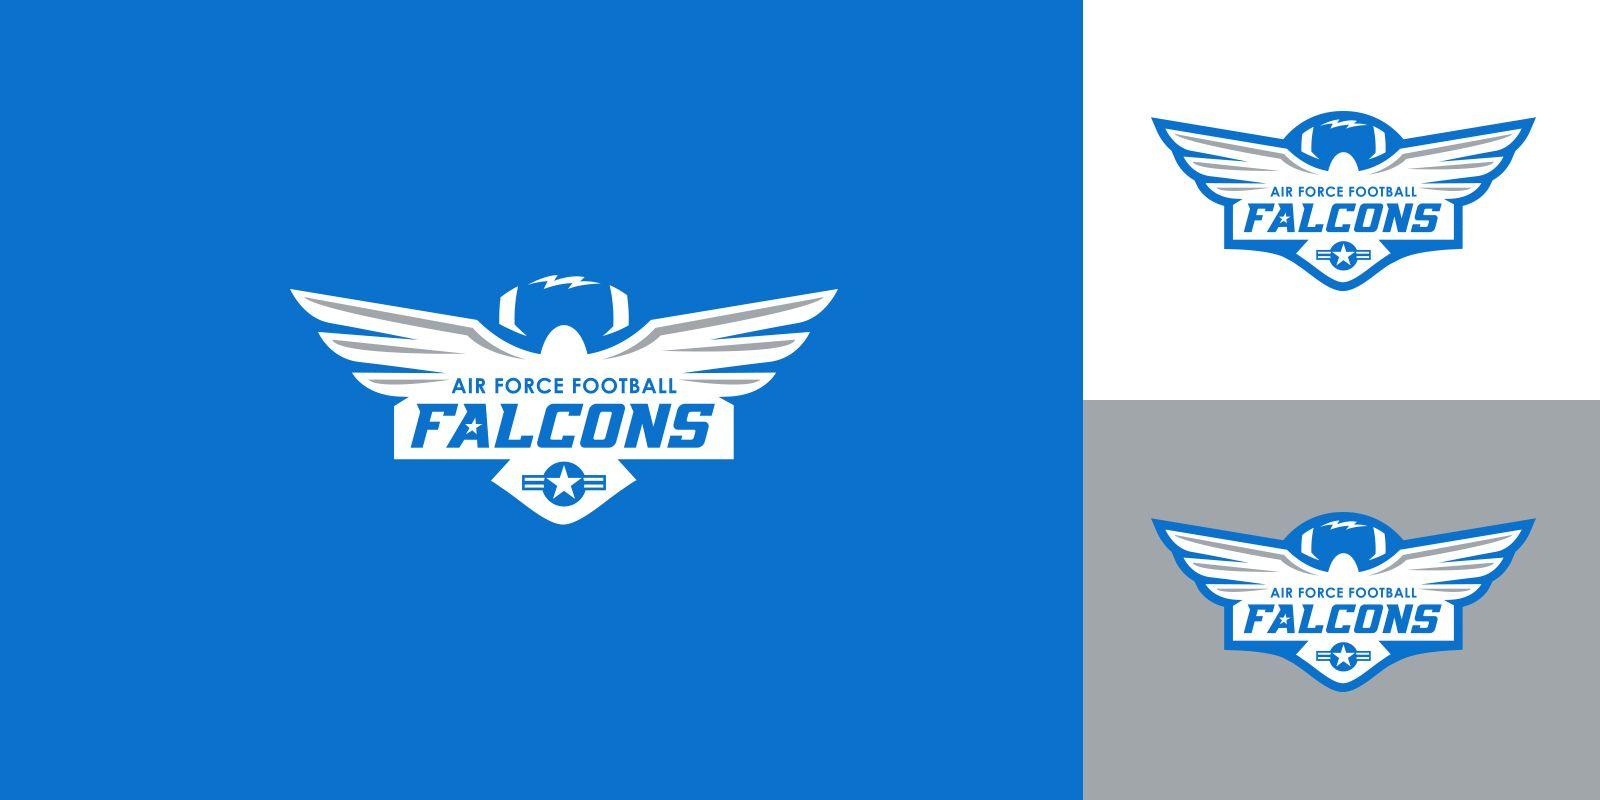 Air Force Falcons Logo - Air Force Football - Brand Identity (Concept) on Behance